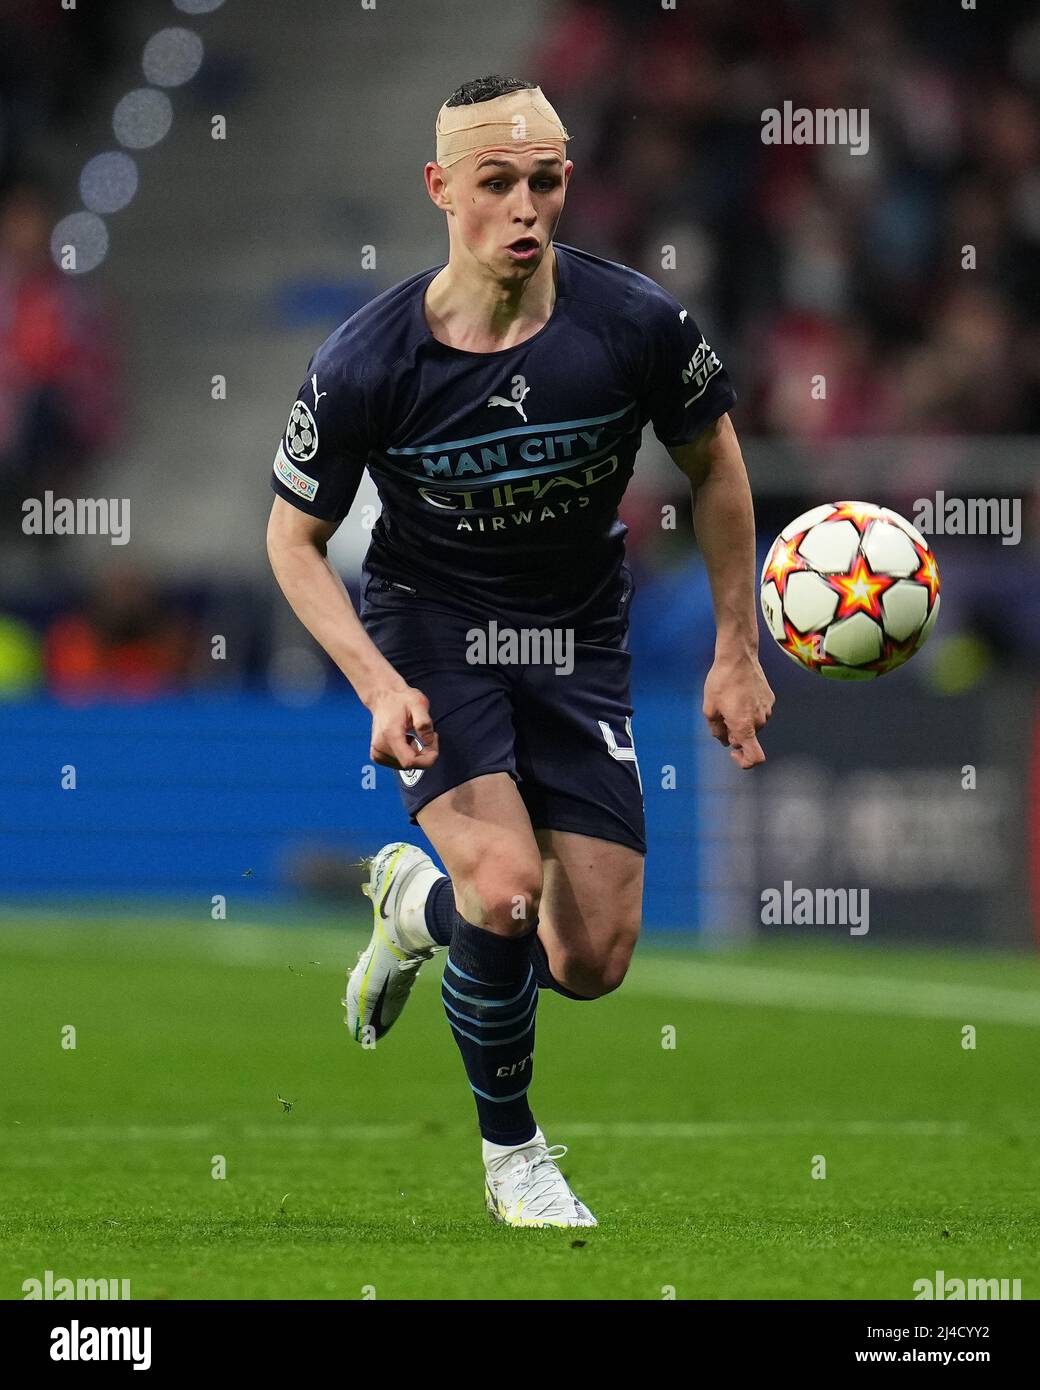 Phil Foden of Manchester CIty during the UEFA Champions League match, Quarter Final, Second Leg, between Atletico de Madrid and Manchester City played at Wanda Metropolitano Stadium on April 13, 2022 in Madrid, Spain. (Photo by Colas Buera / PRESSINPHOTO) Stock Photo